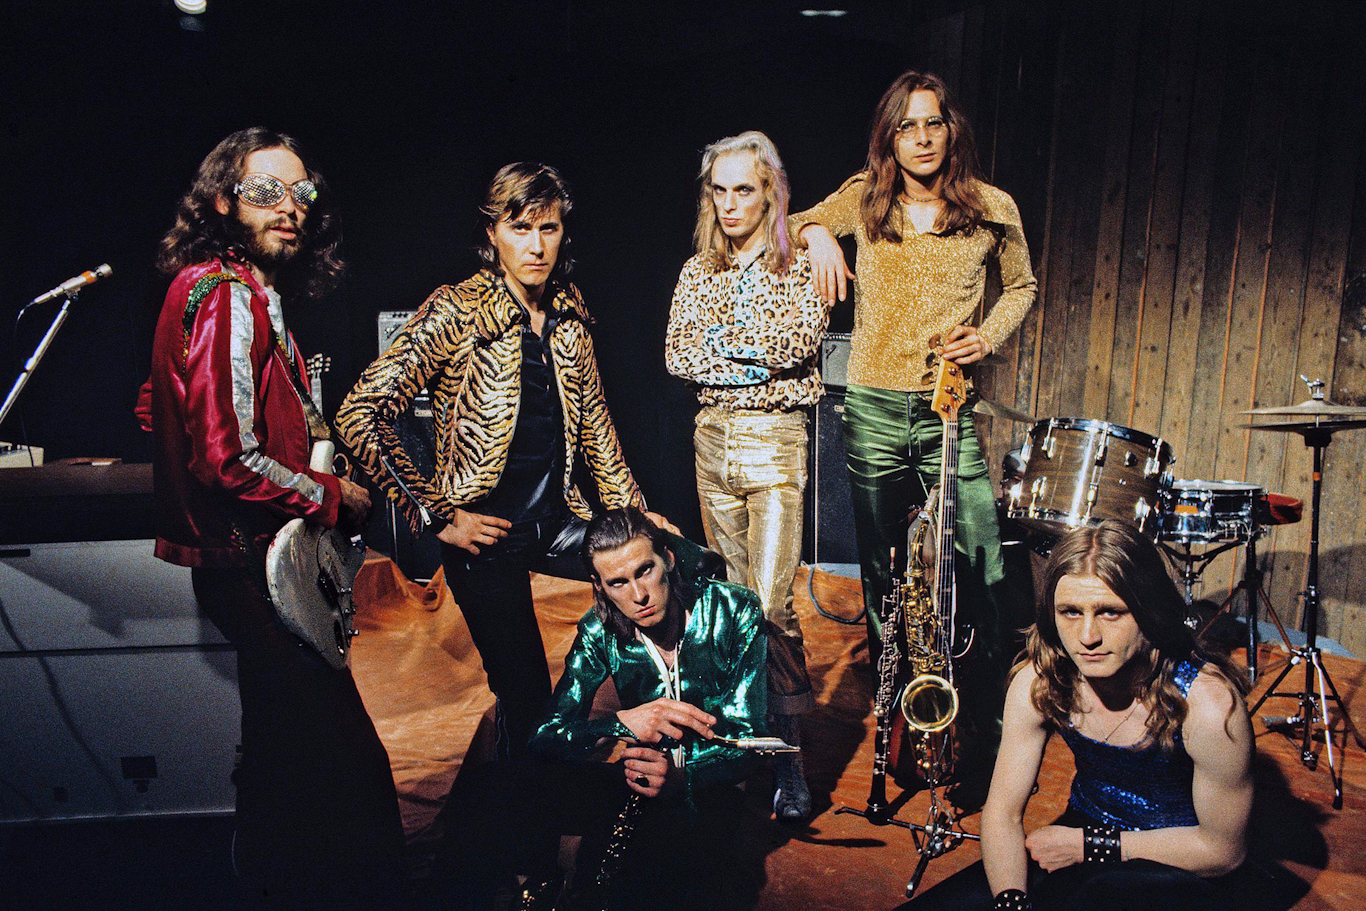 ROXY MUSIC's 'The Best Of Roxy Music' to be released on vinyl for the first time in September 1